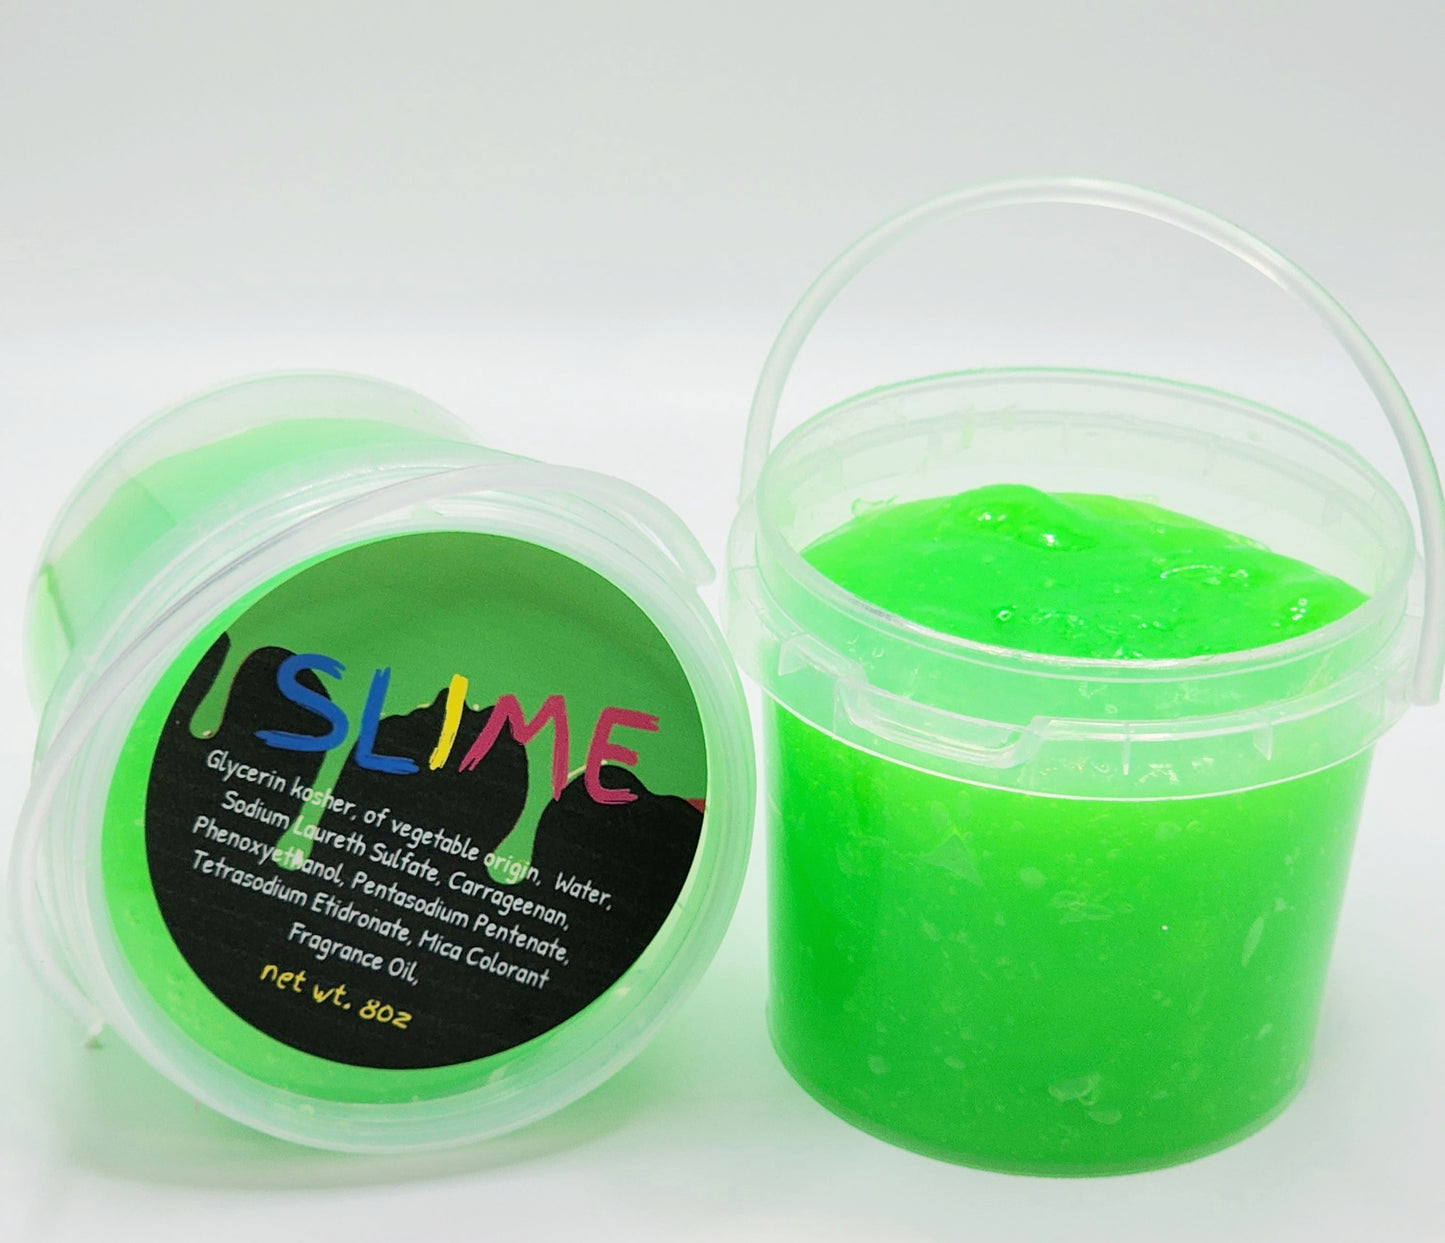 Tub of Jelly Slime Soap (8oz)